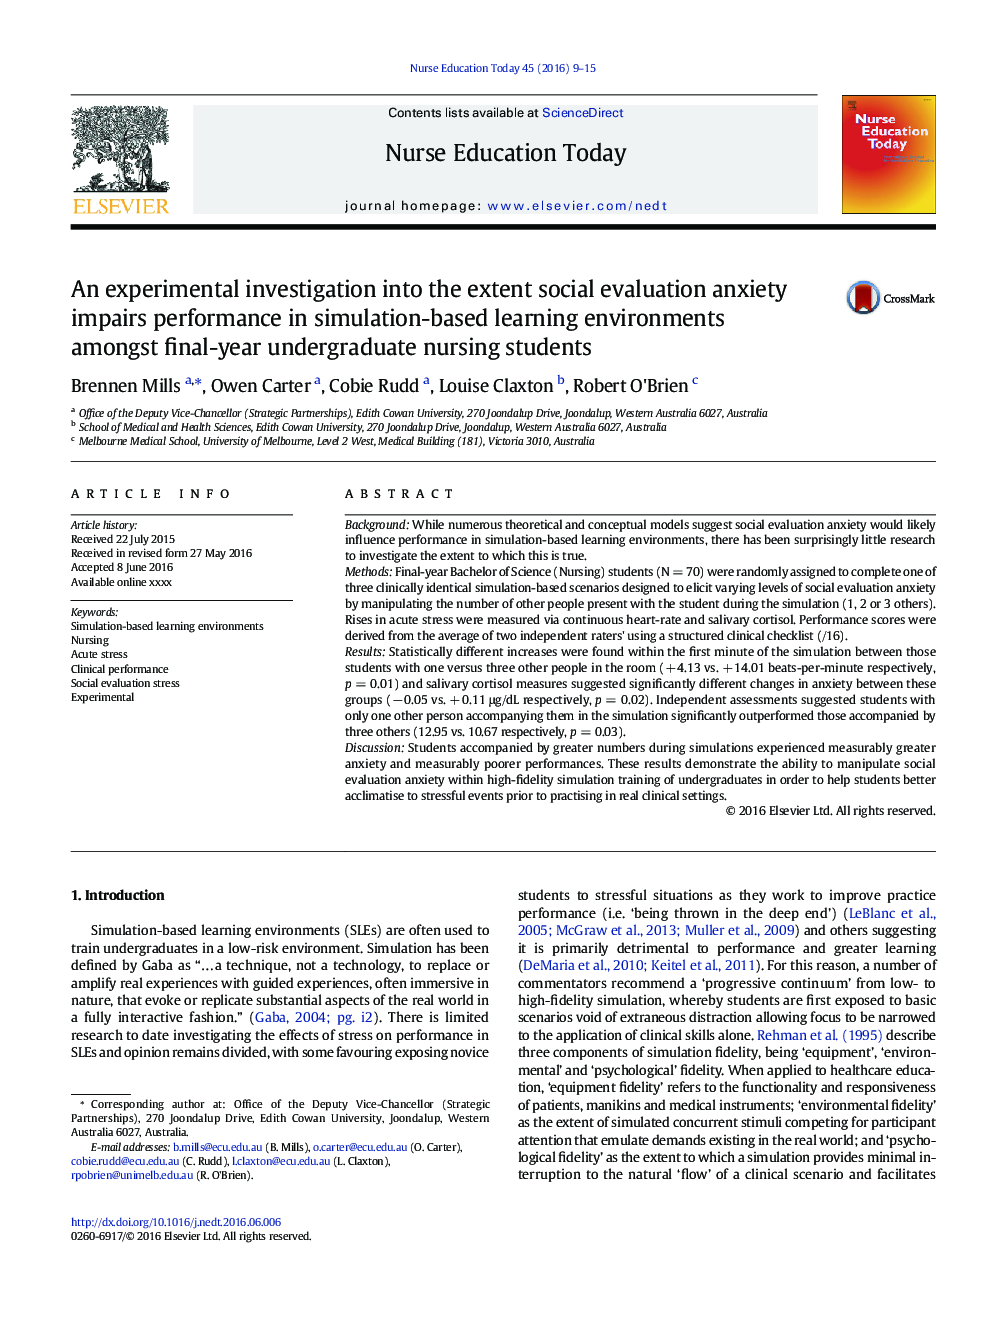 An experimental investigation into the extent social evaluation anxiety impairs performance in simulation-based learning environments amongst final-year undergraduate nursing students